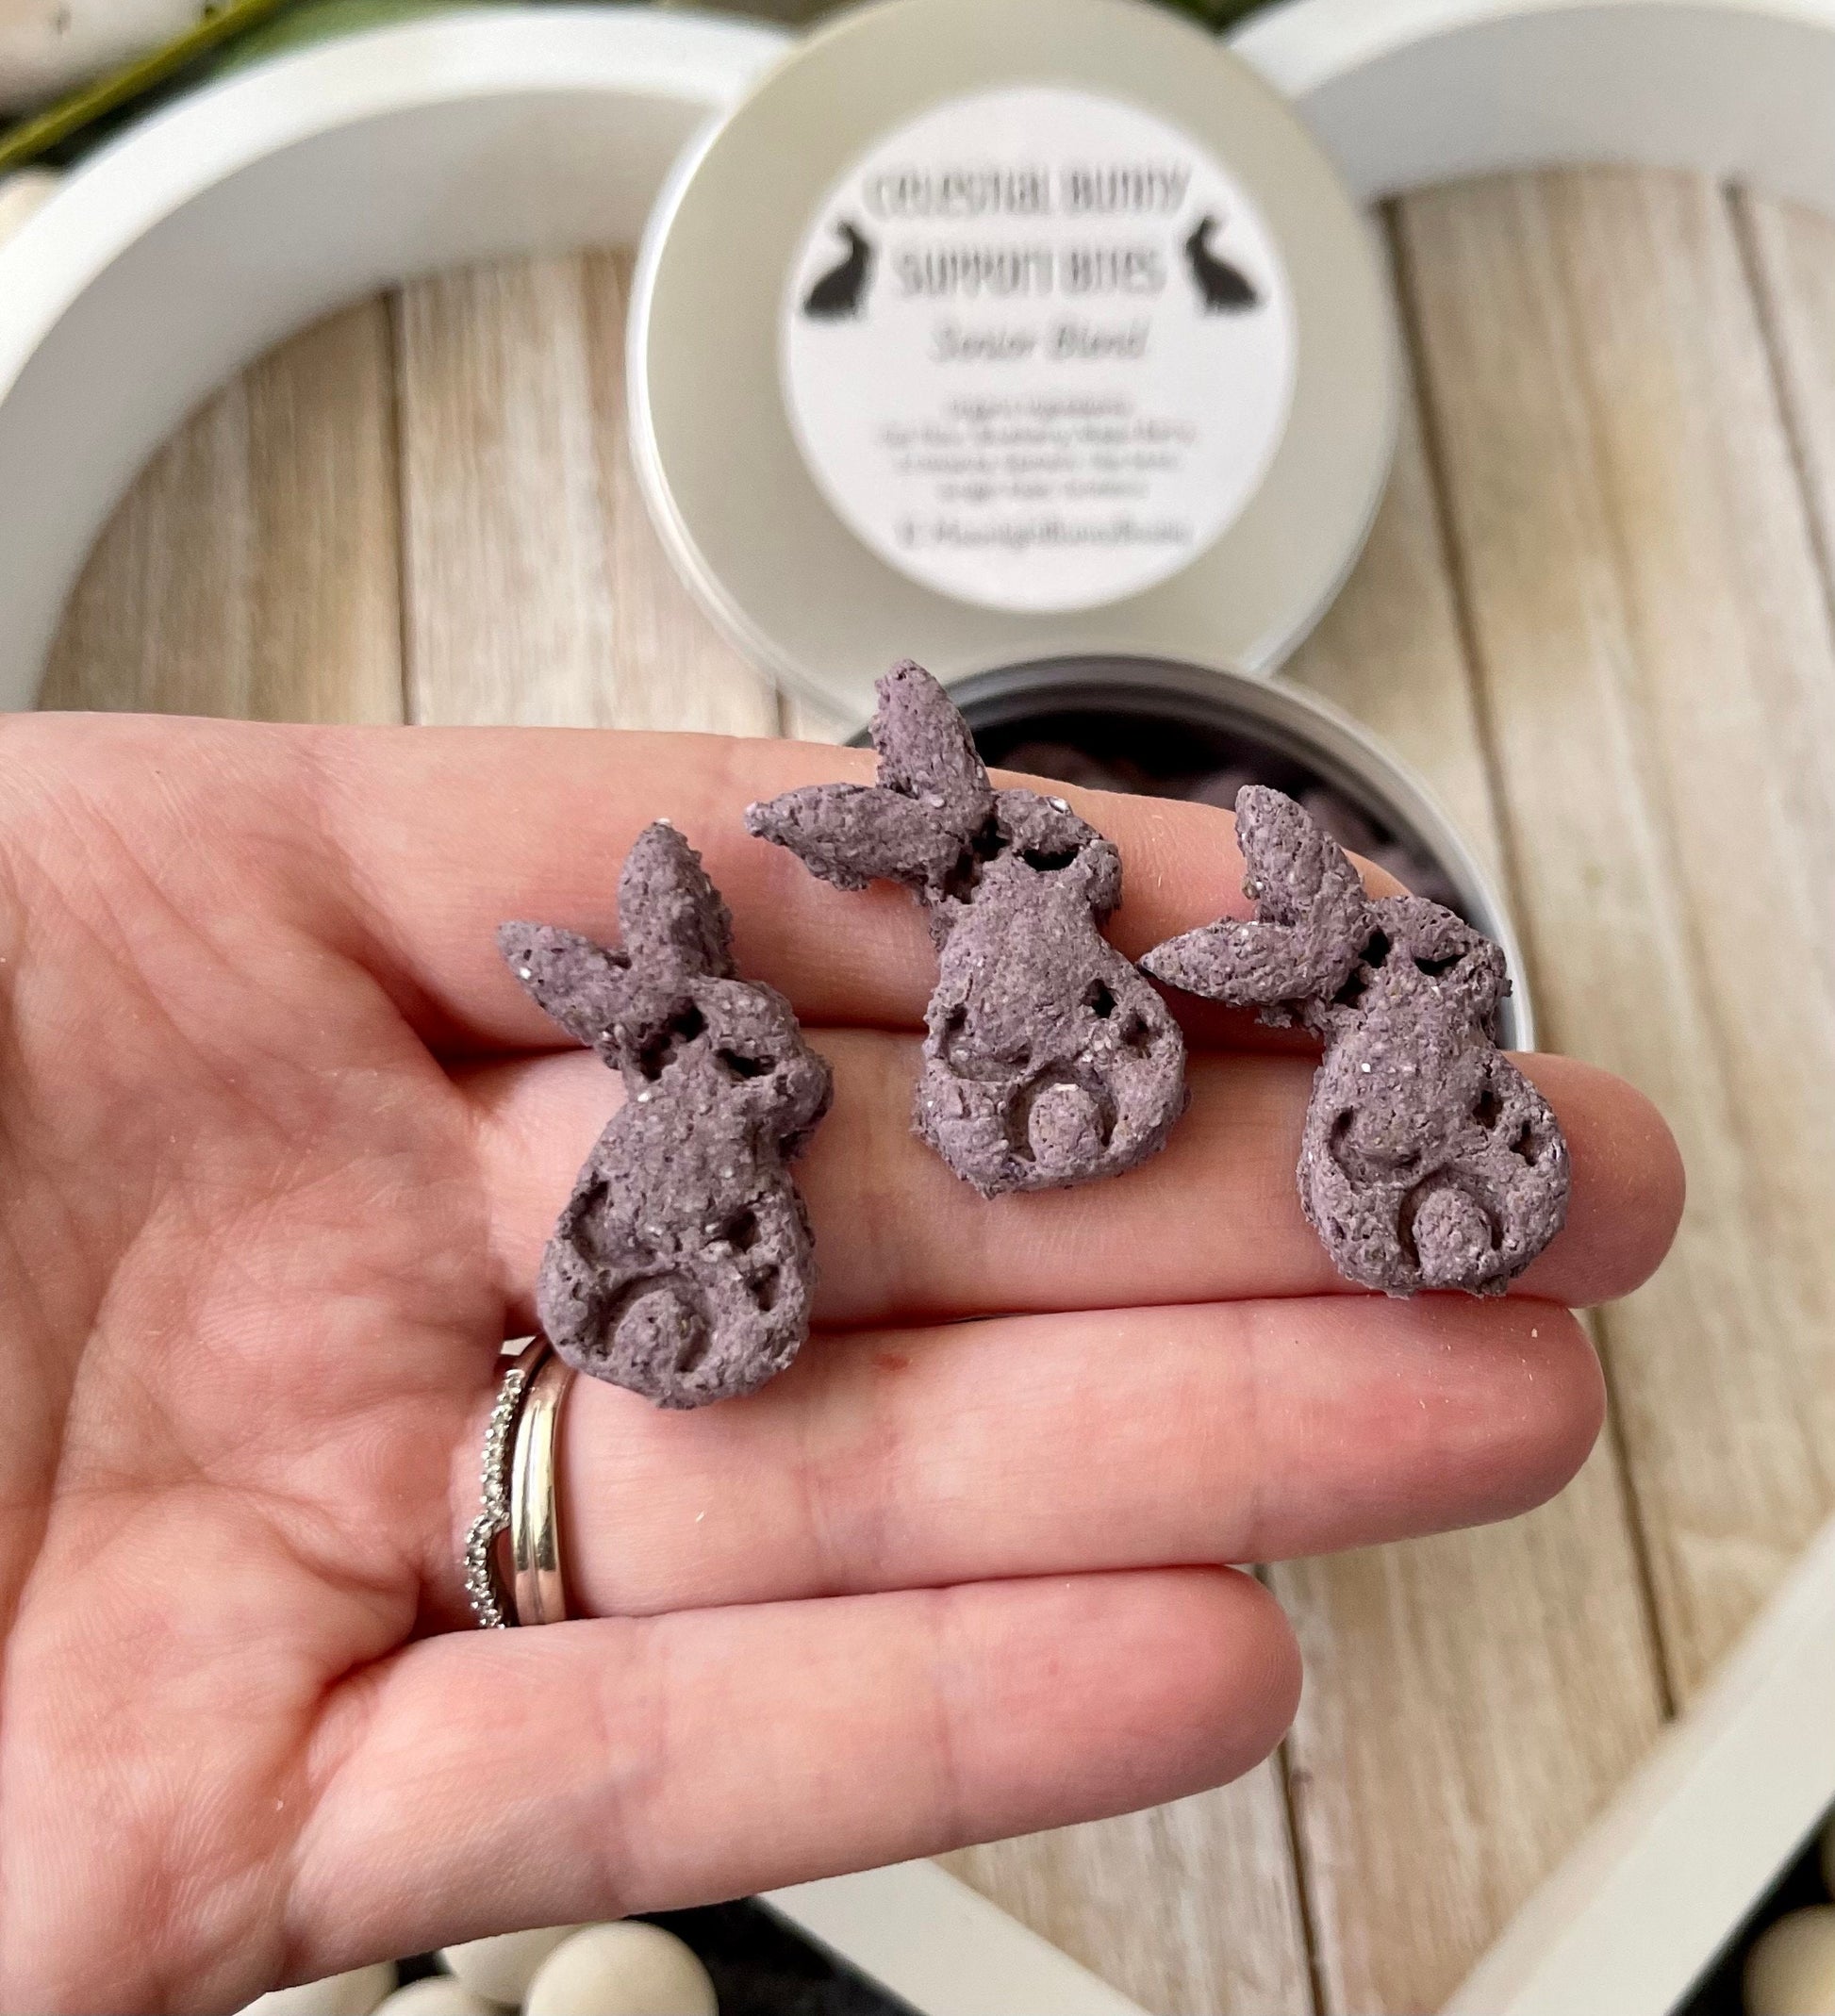 Celestial Bunny Bites~ Senior Blend~bite sized healthy treat, all natural, unique, handcrafted blend for rabbits, mice, & small animals